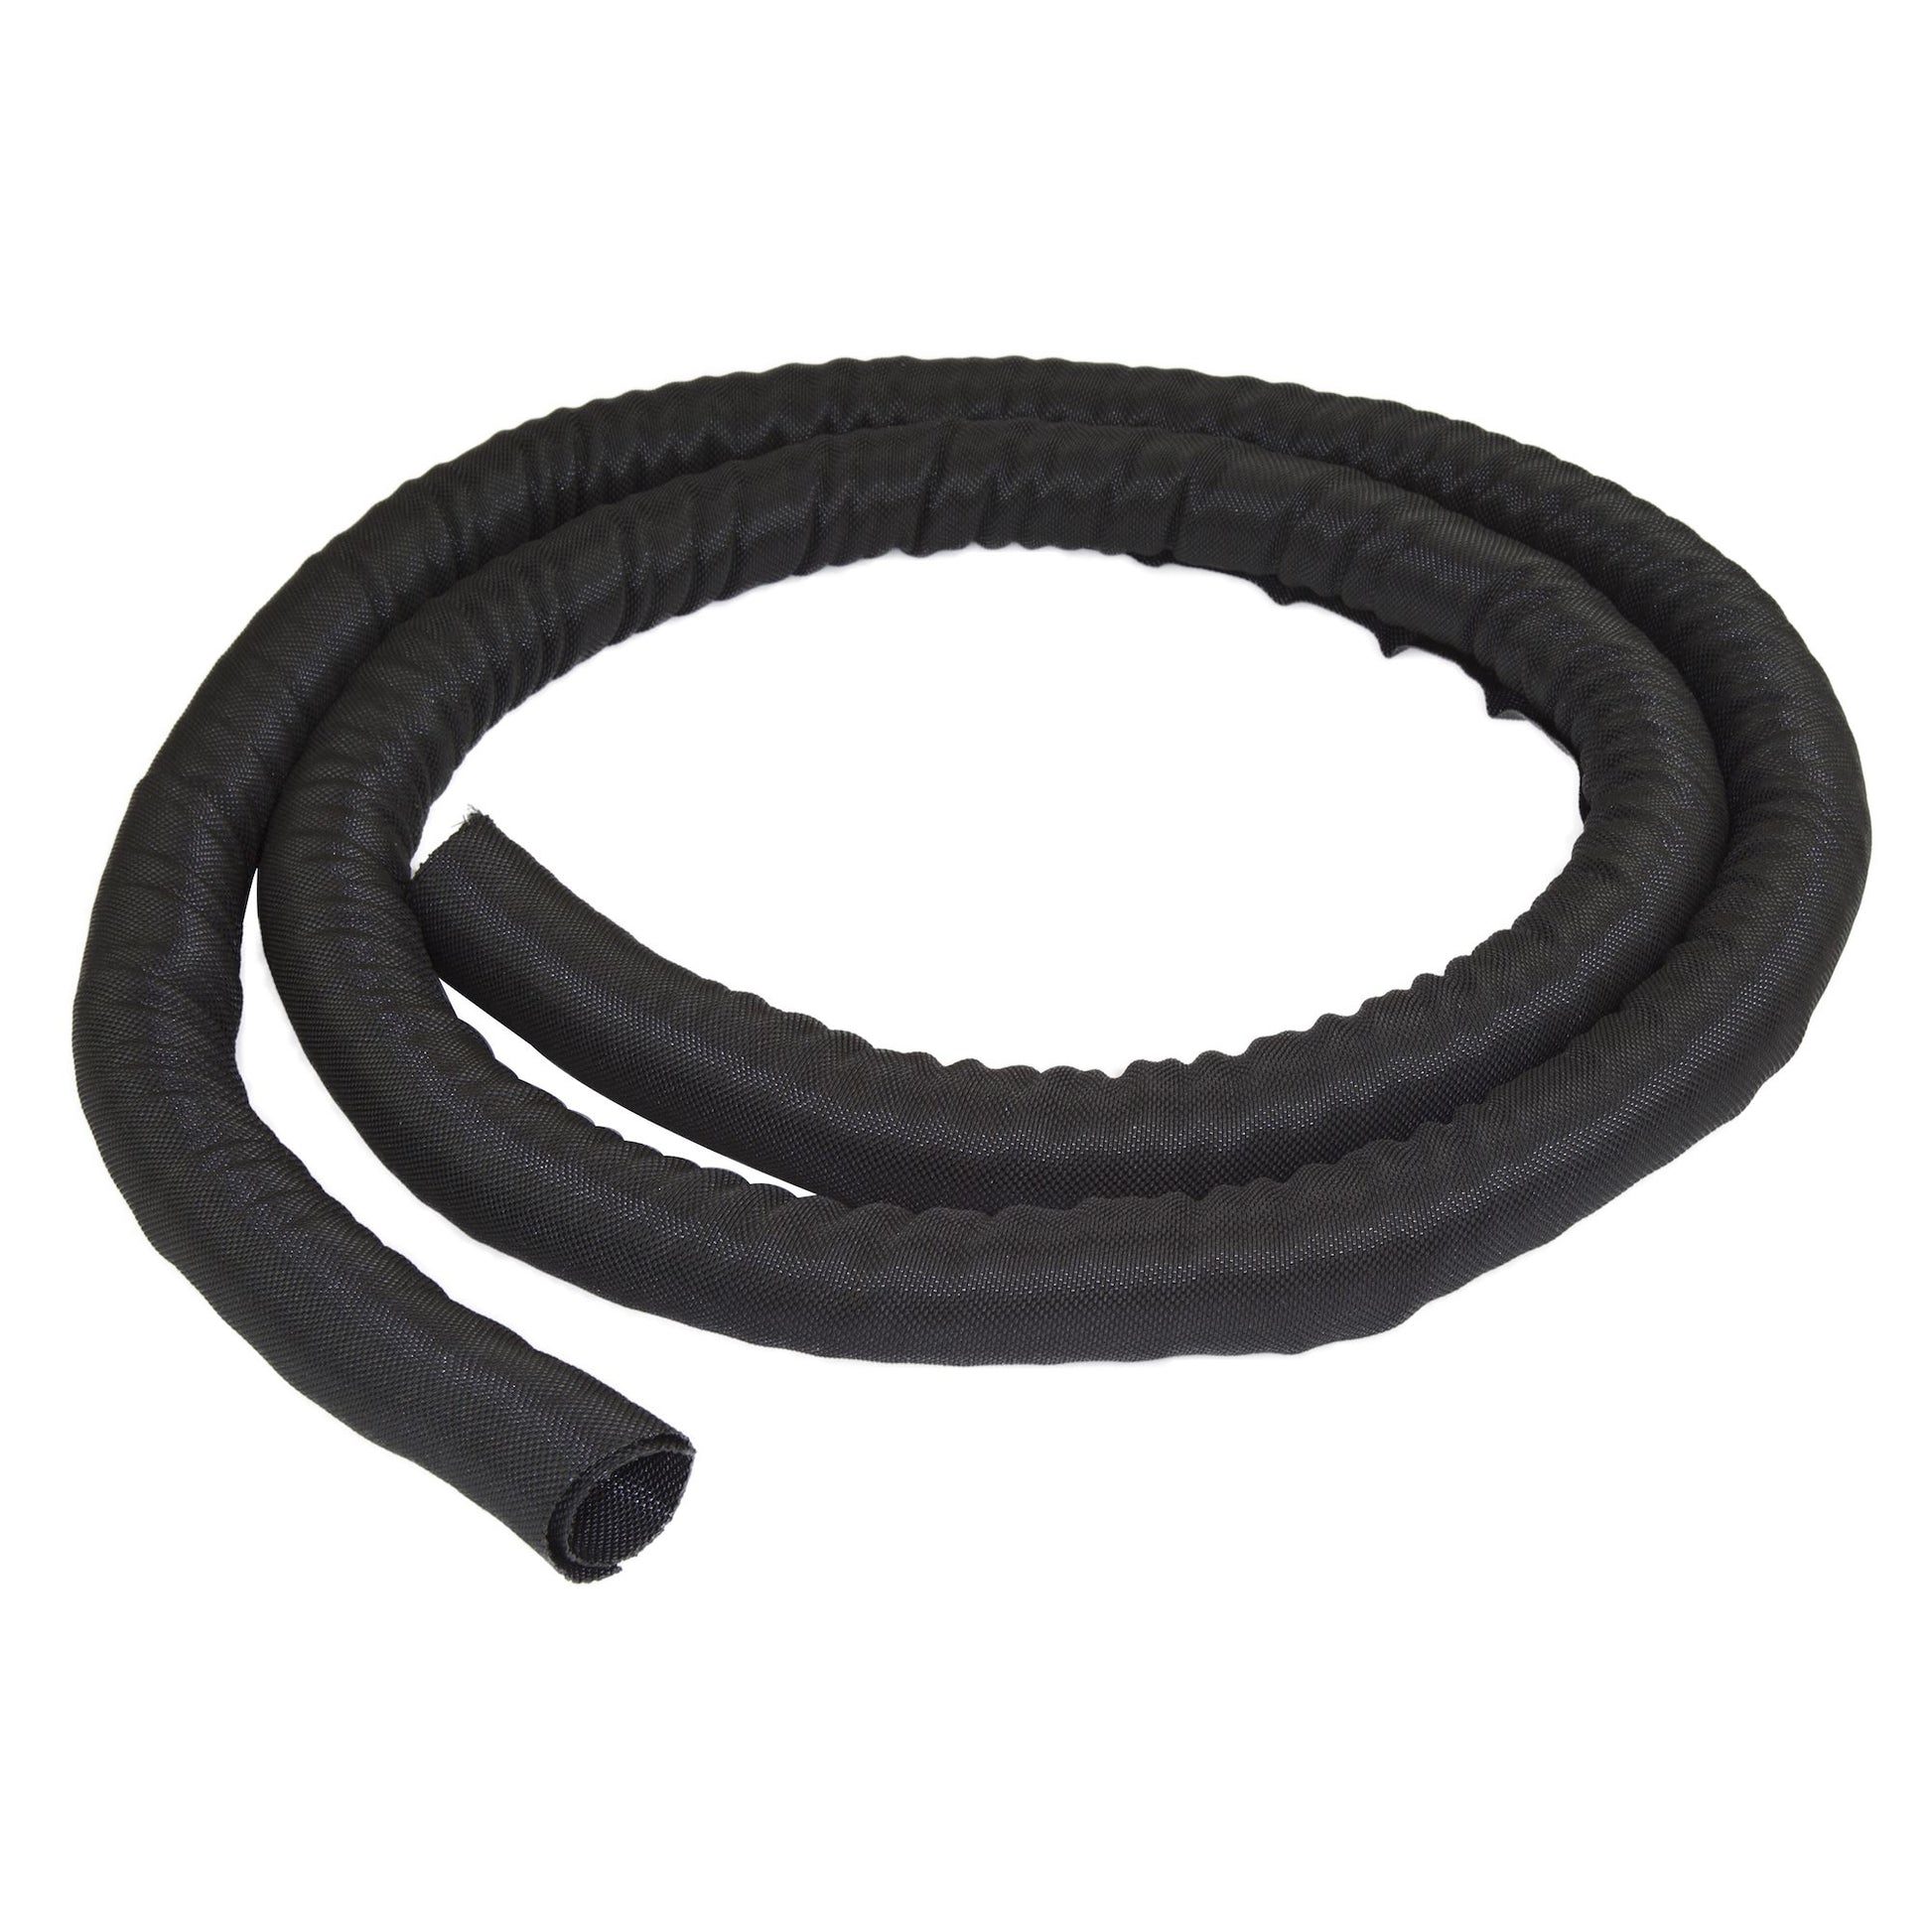 StarTech.com 6.5' (2m) Cable Management Sleeve - Flexible Coiled Cable Wrap - 1.0-1.5" dia. Expandable Sleeve - Polyester Cord Manager/Protector/Concealer - Black Trimmable Cable Organizer-0